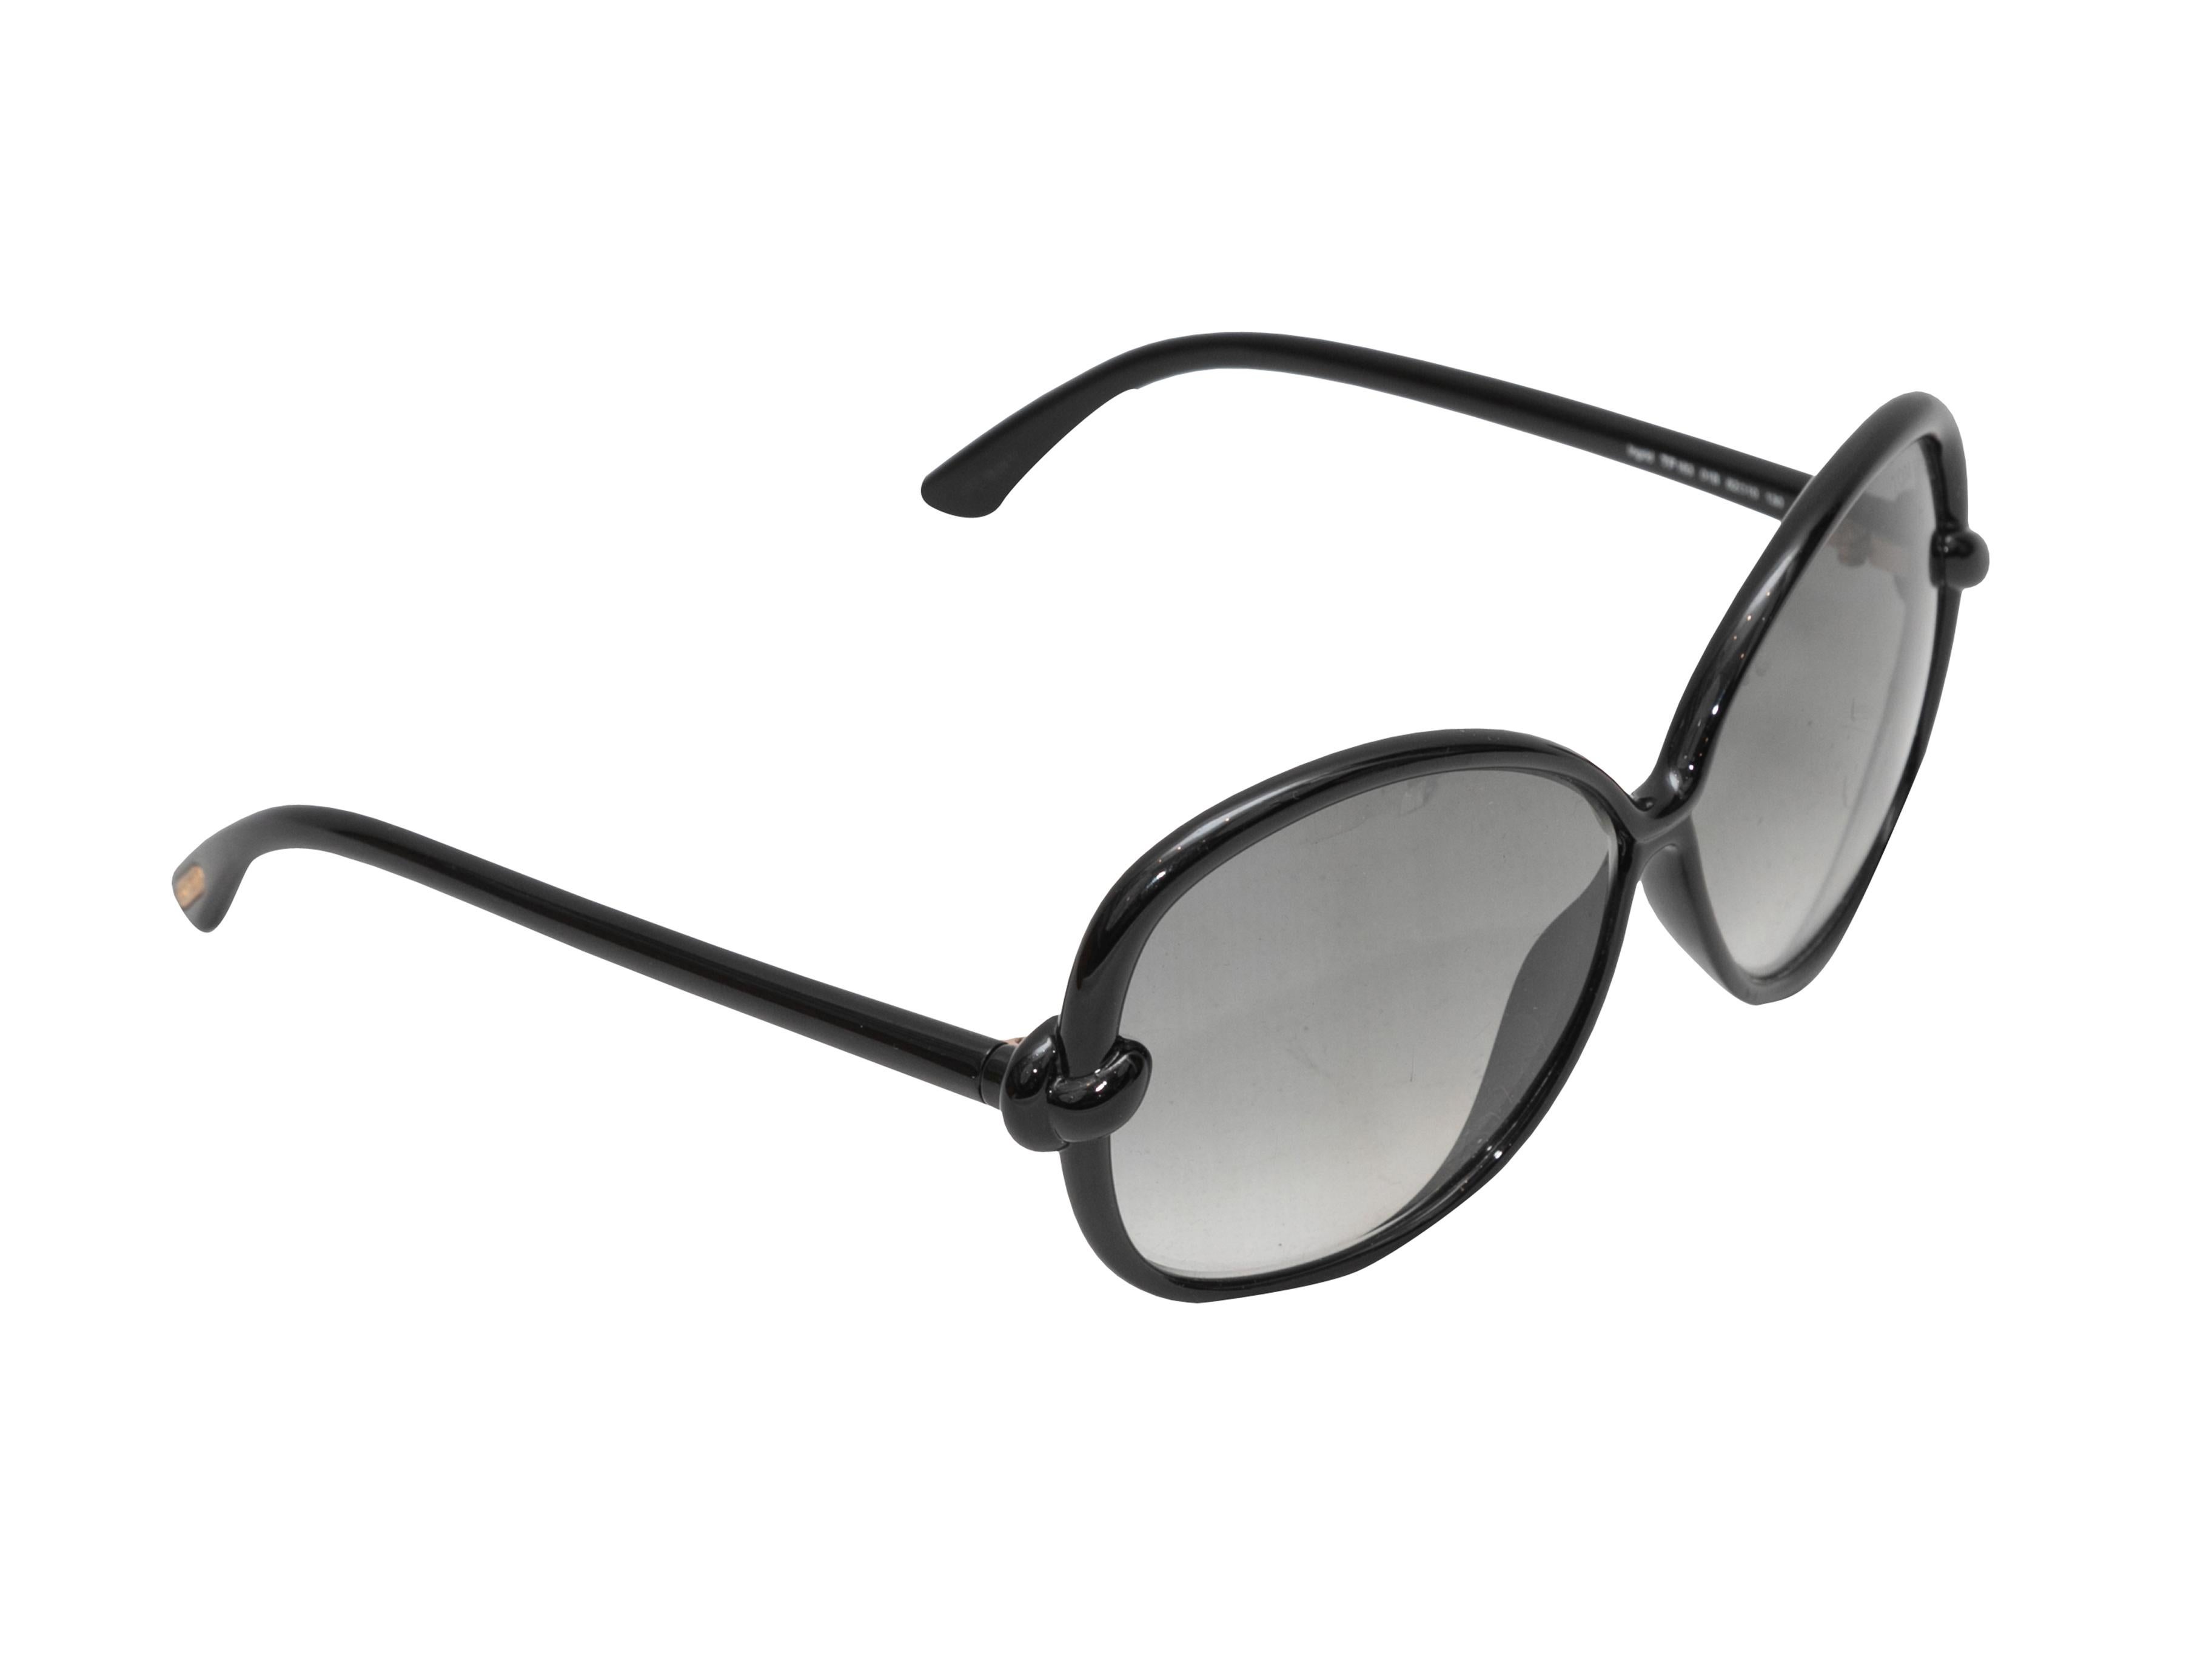 Black acetate oversized Sonja sunglasses by Tom Ford. Grey tinted lenses. 2.5